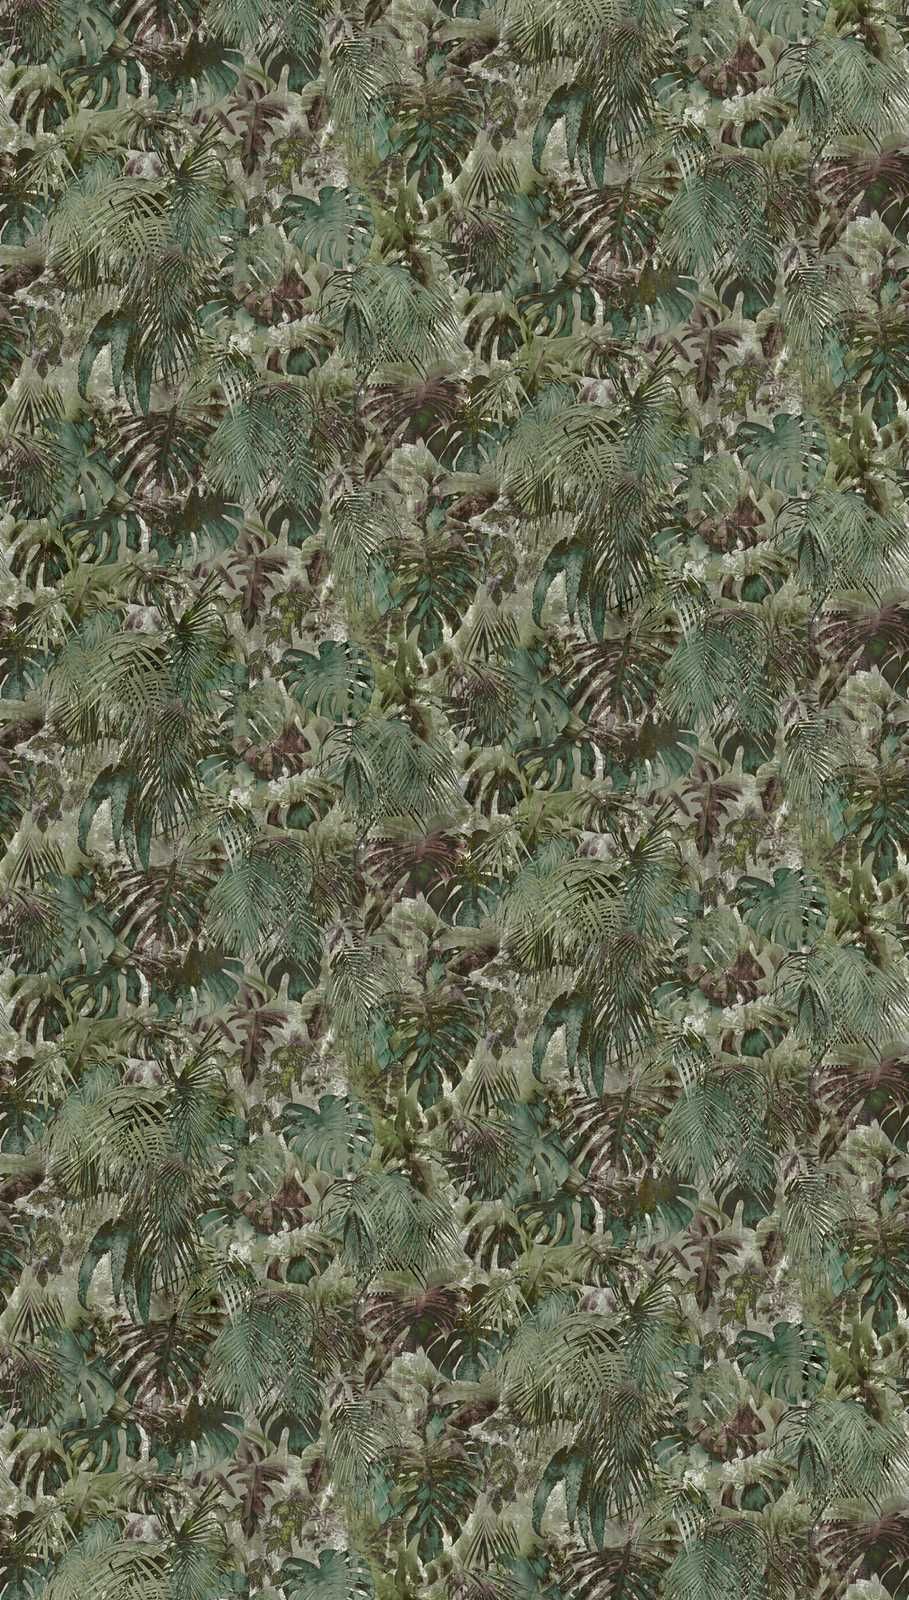             Jungle motif non-woven wallpaper with tropical leaf pattern - green
        